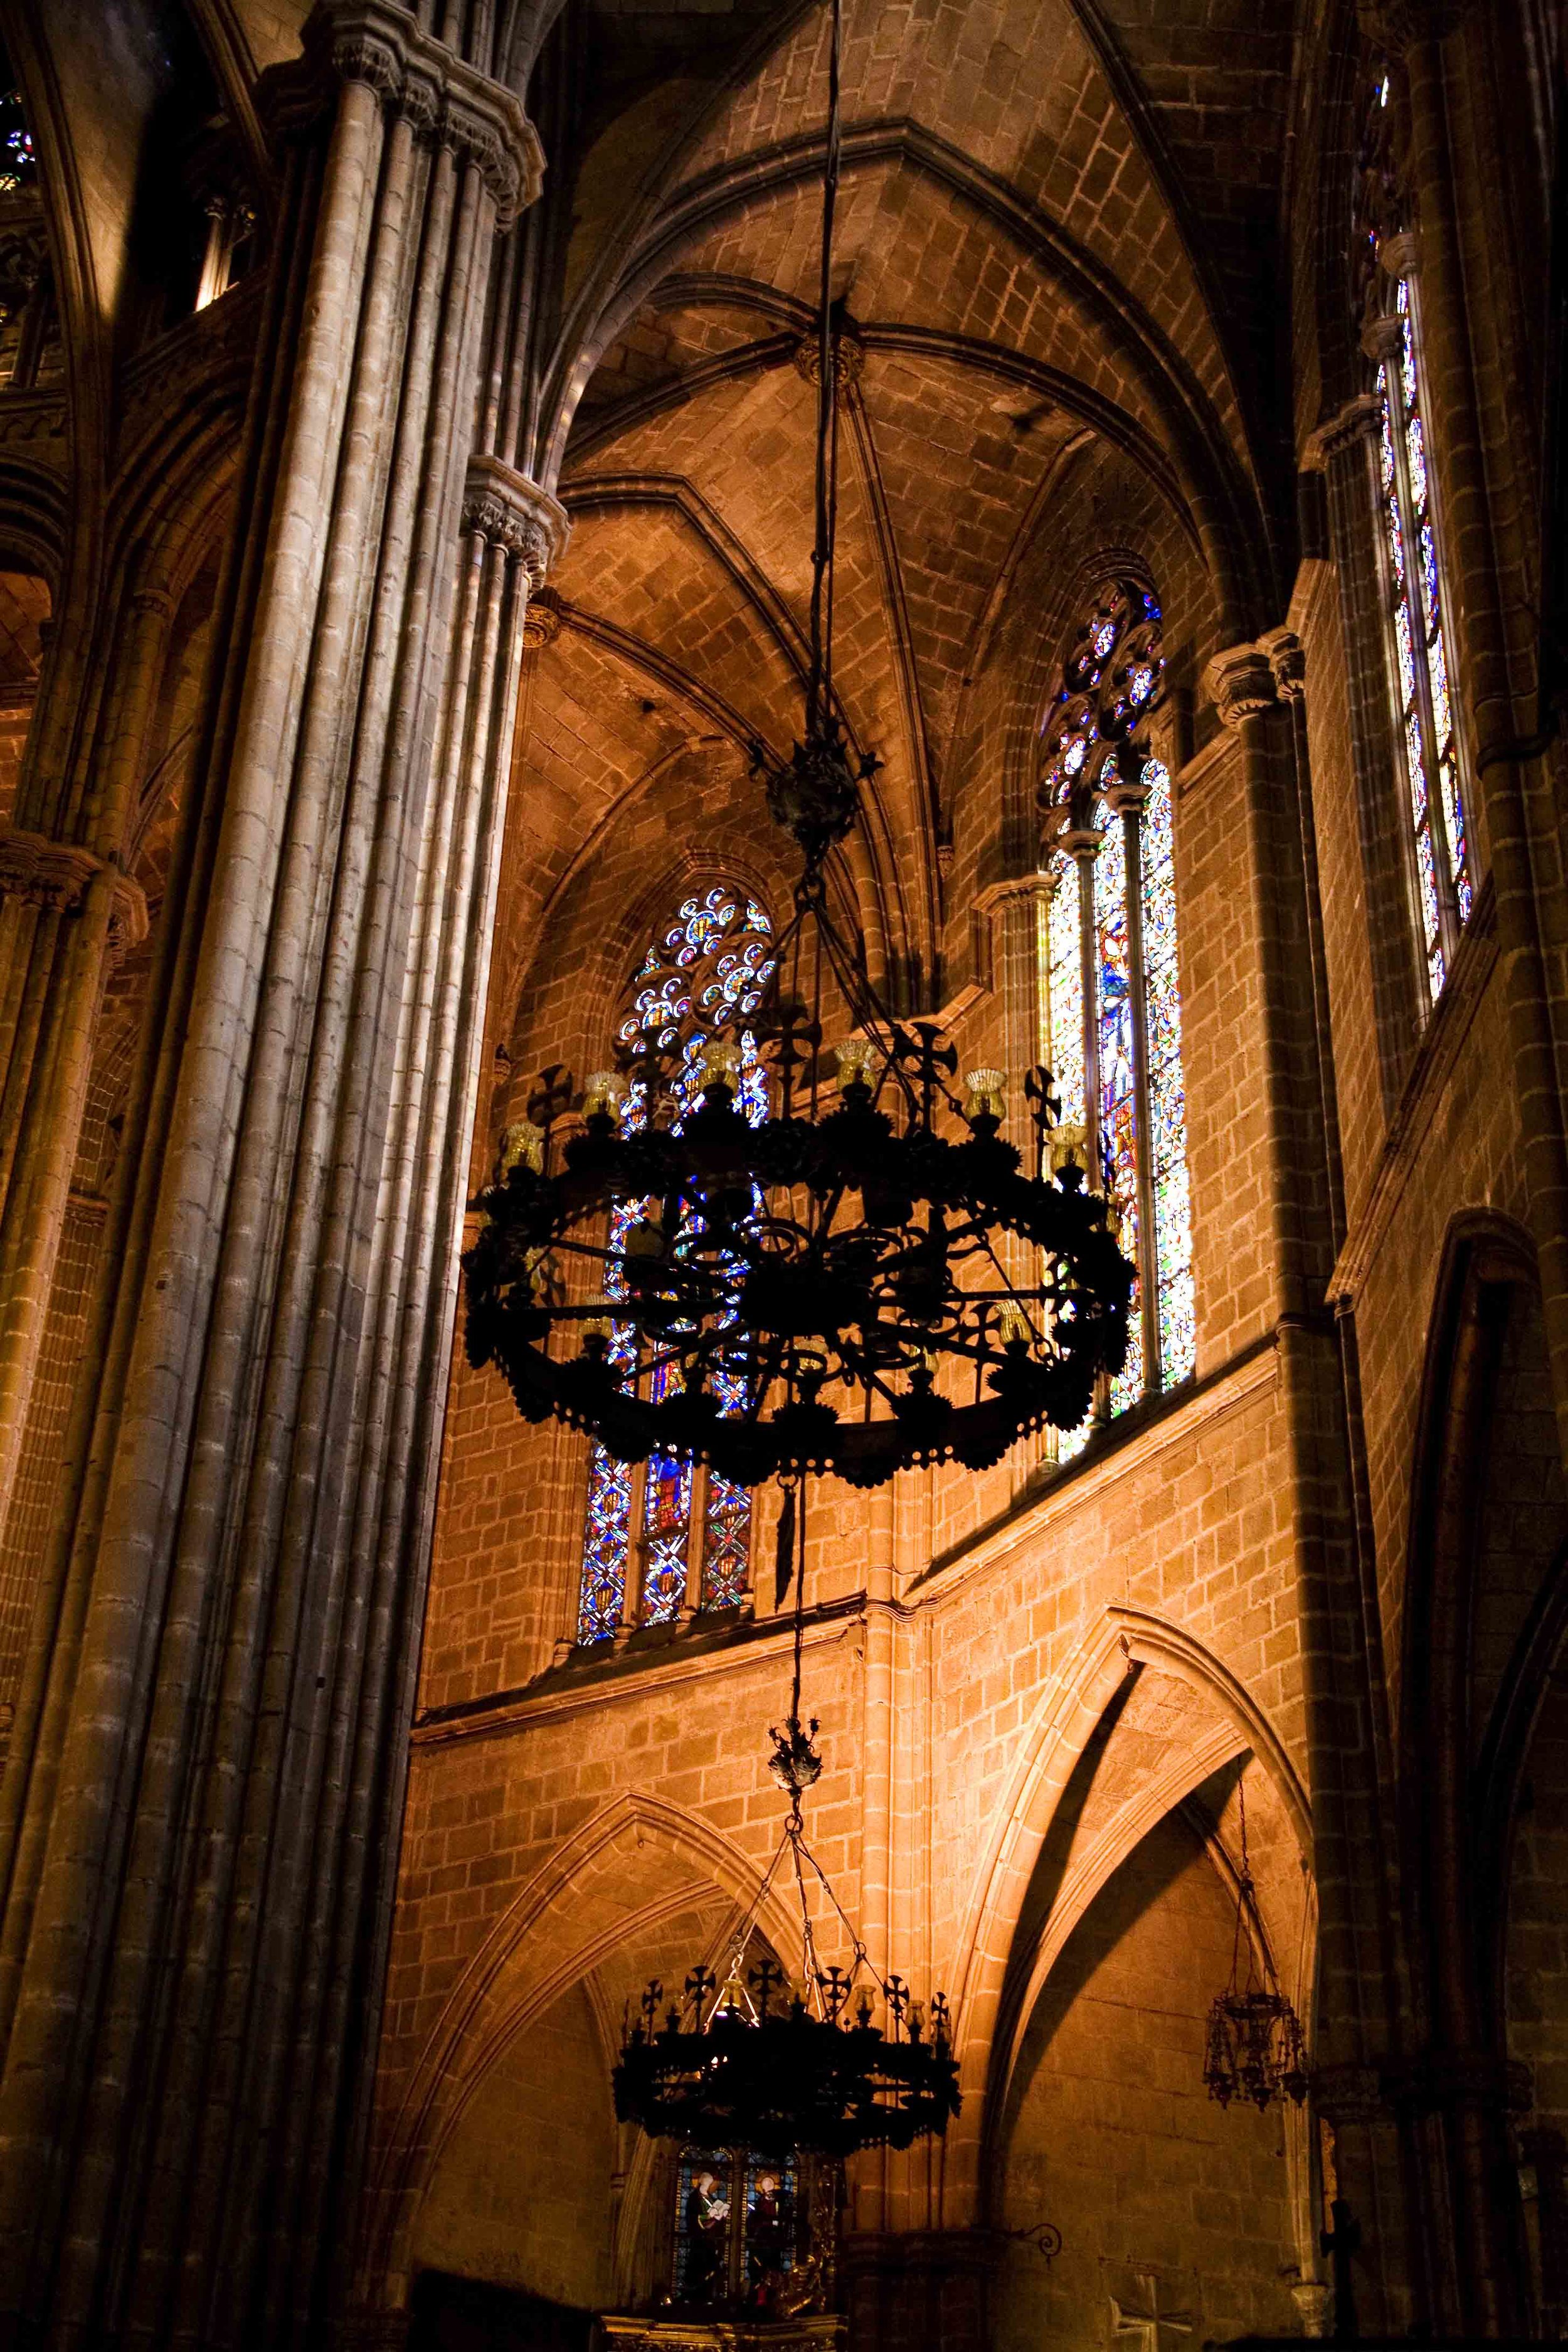 A-Cathedral Ceiling 2A.jpg